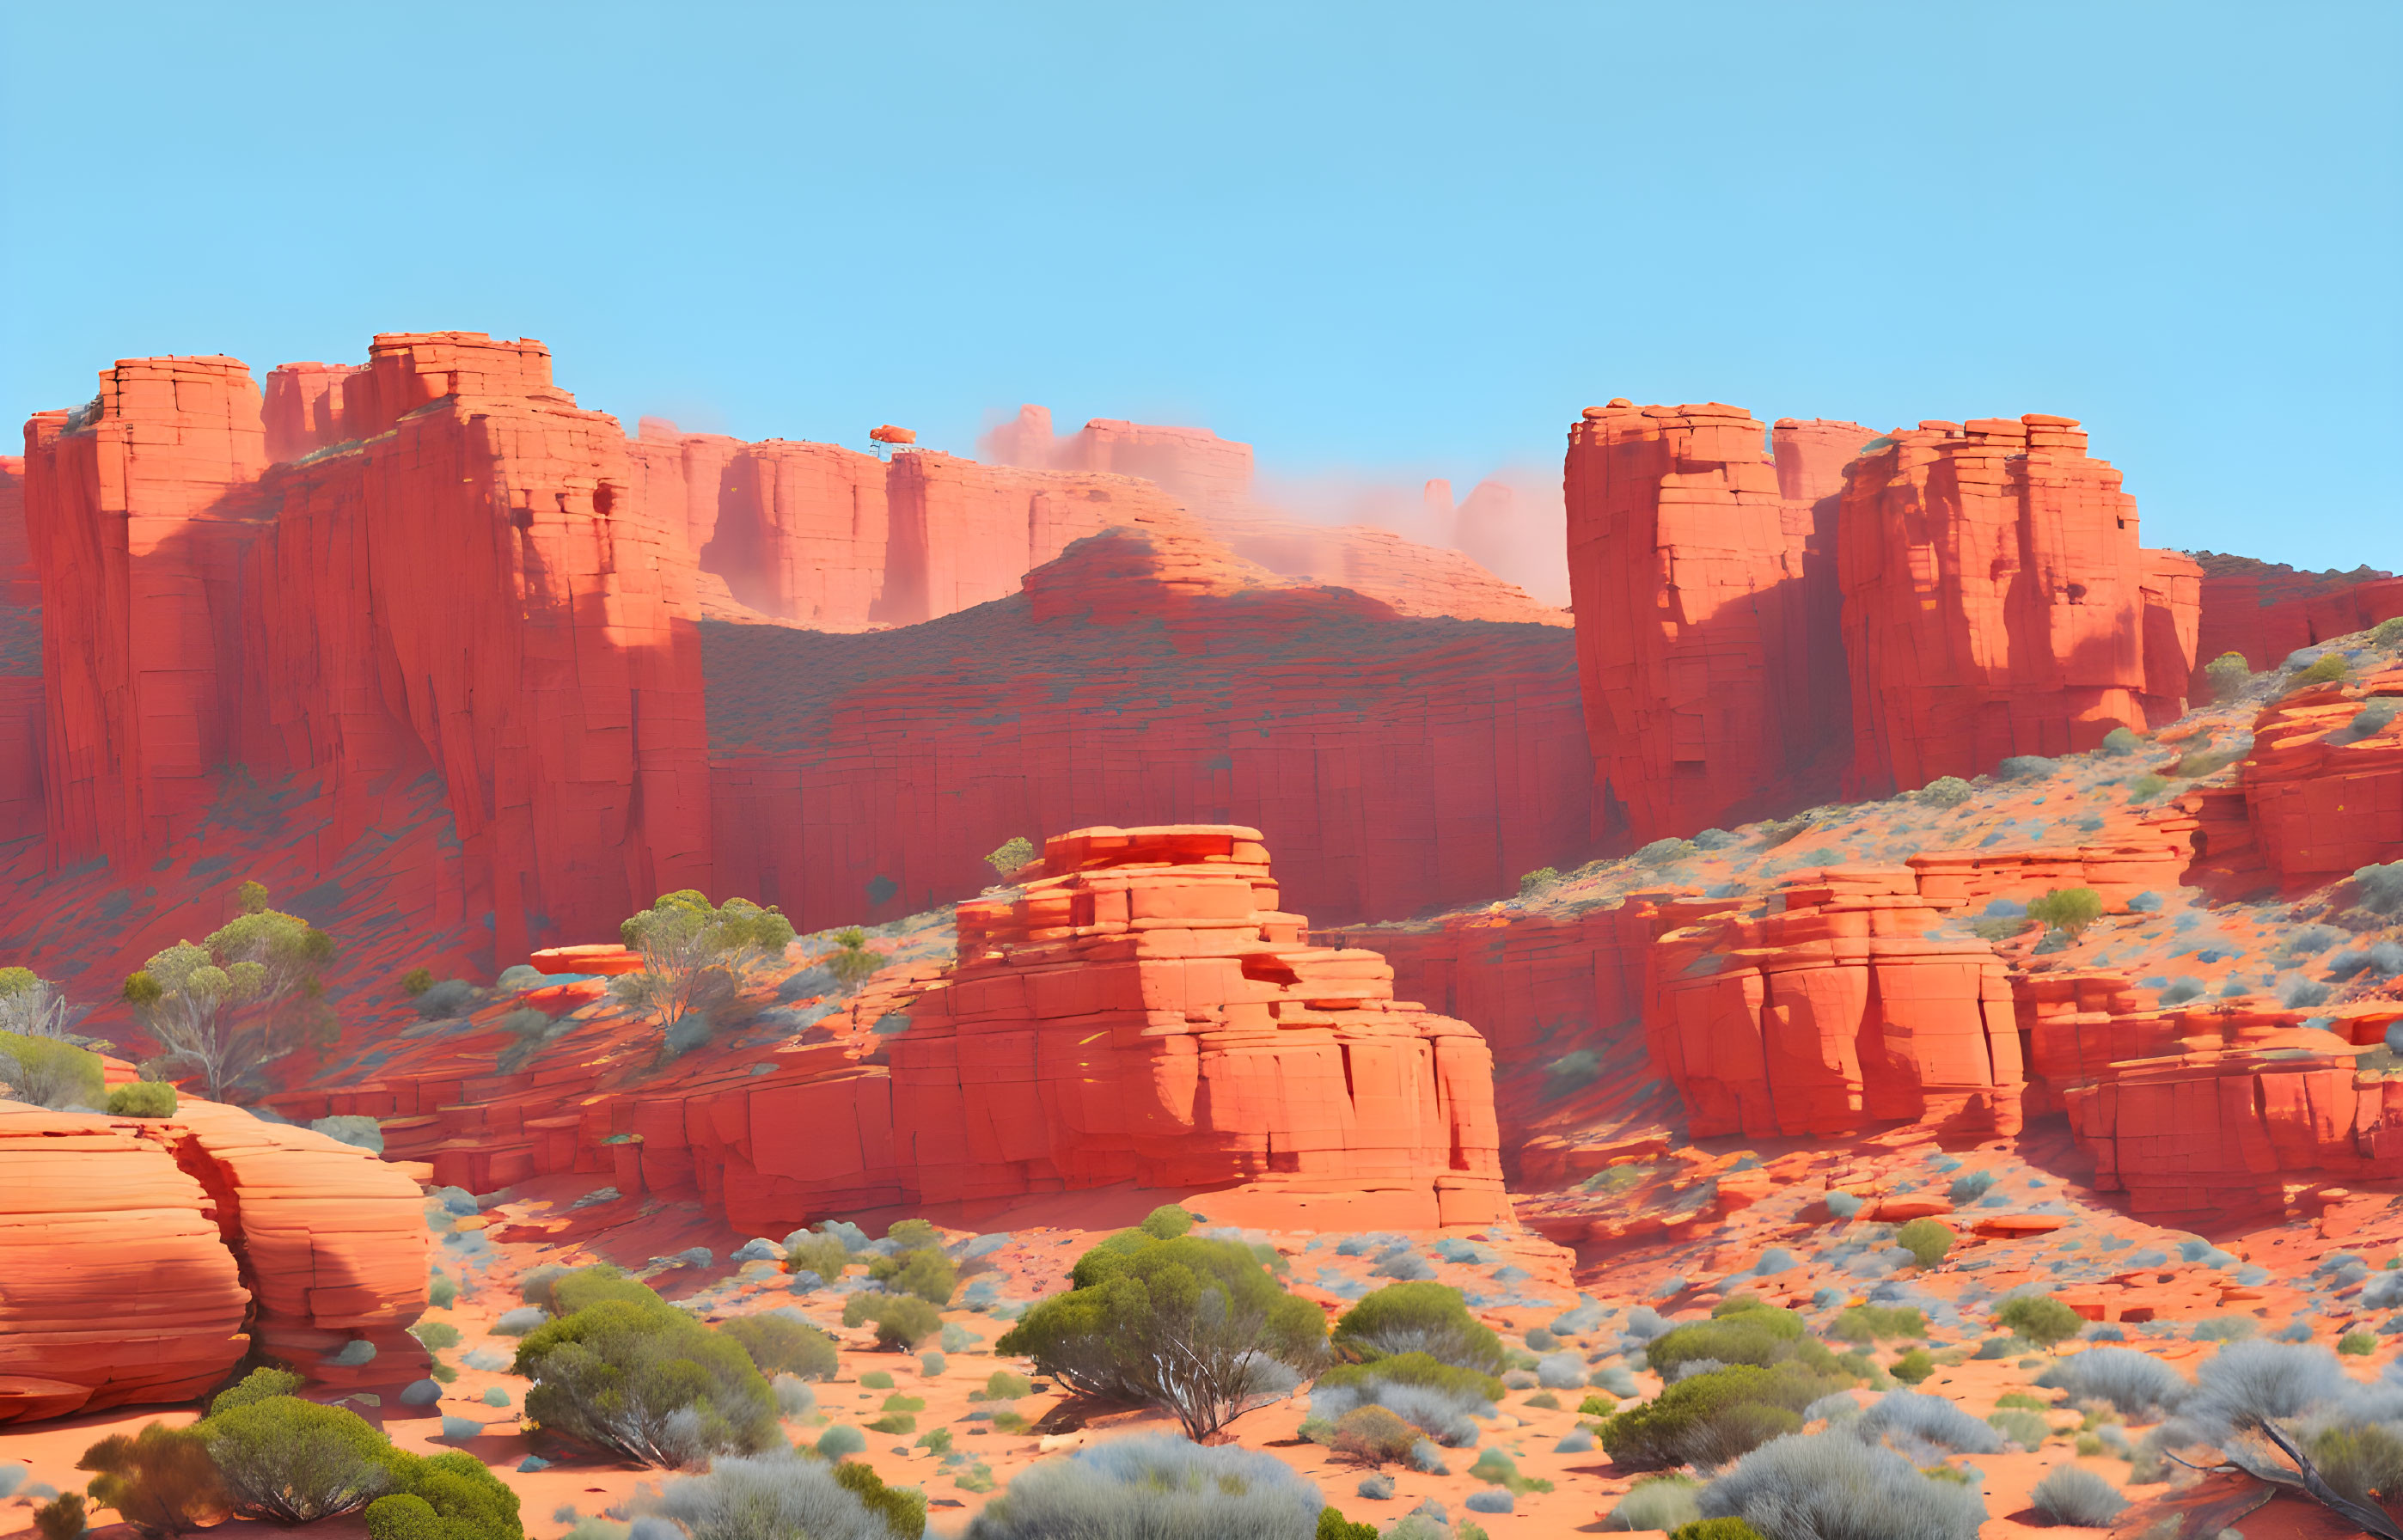 Desert Canvas: A Colorful Oasis